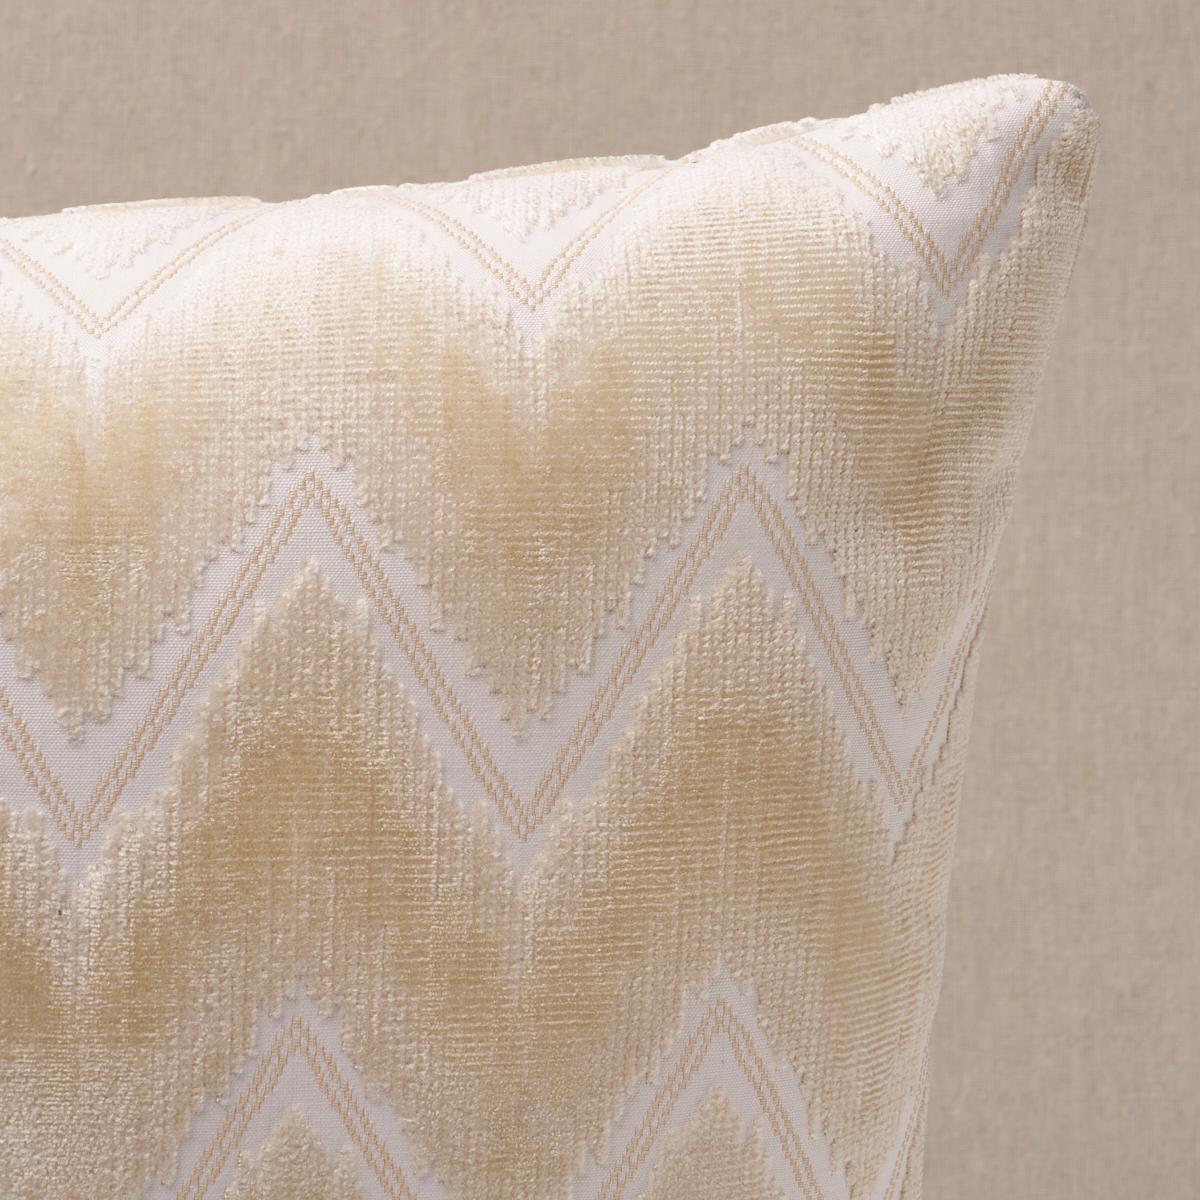 This pillow features Chevron Velvet with a knife edge finish. A fabulous combination of plush ombré and delicate accent stripes, this luxe chevron has a dynamic presence. Pillow includes a feather/down fill insert and hidden zipper closure.
